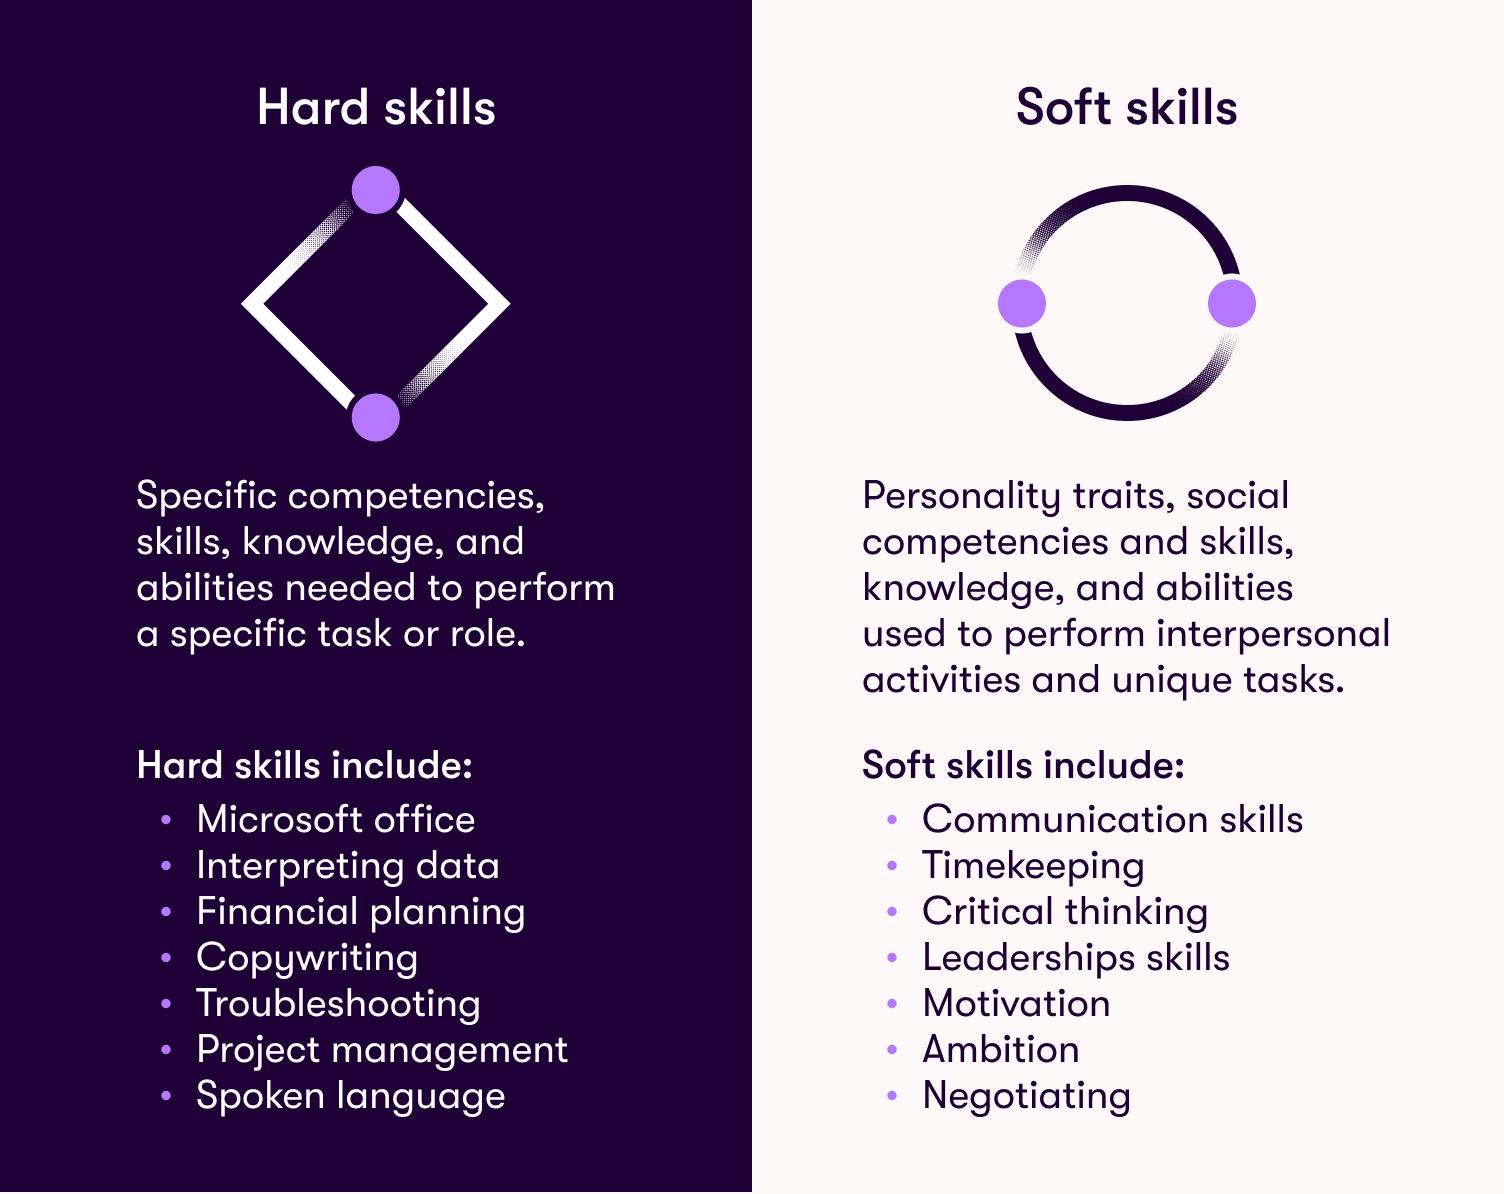 The image represents key differences between soft and hard skills